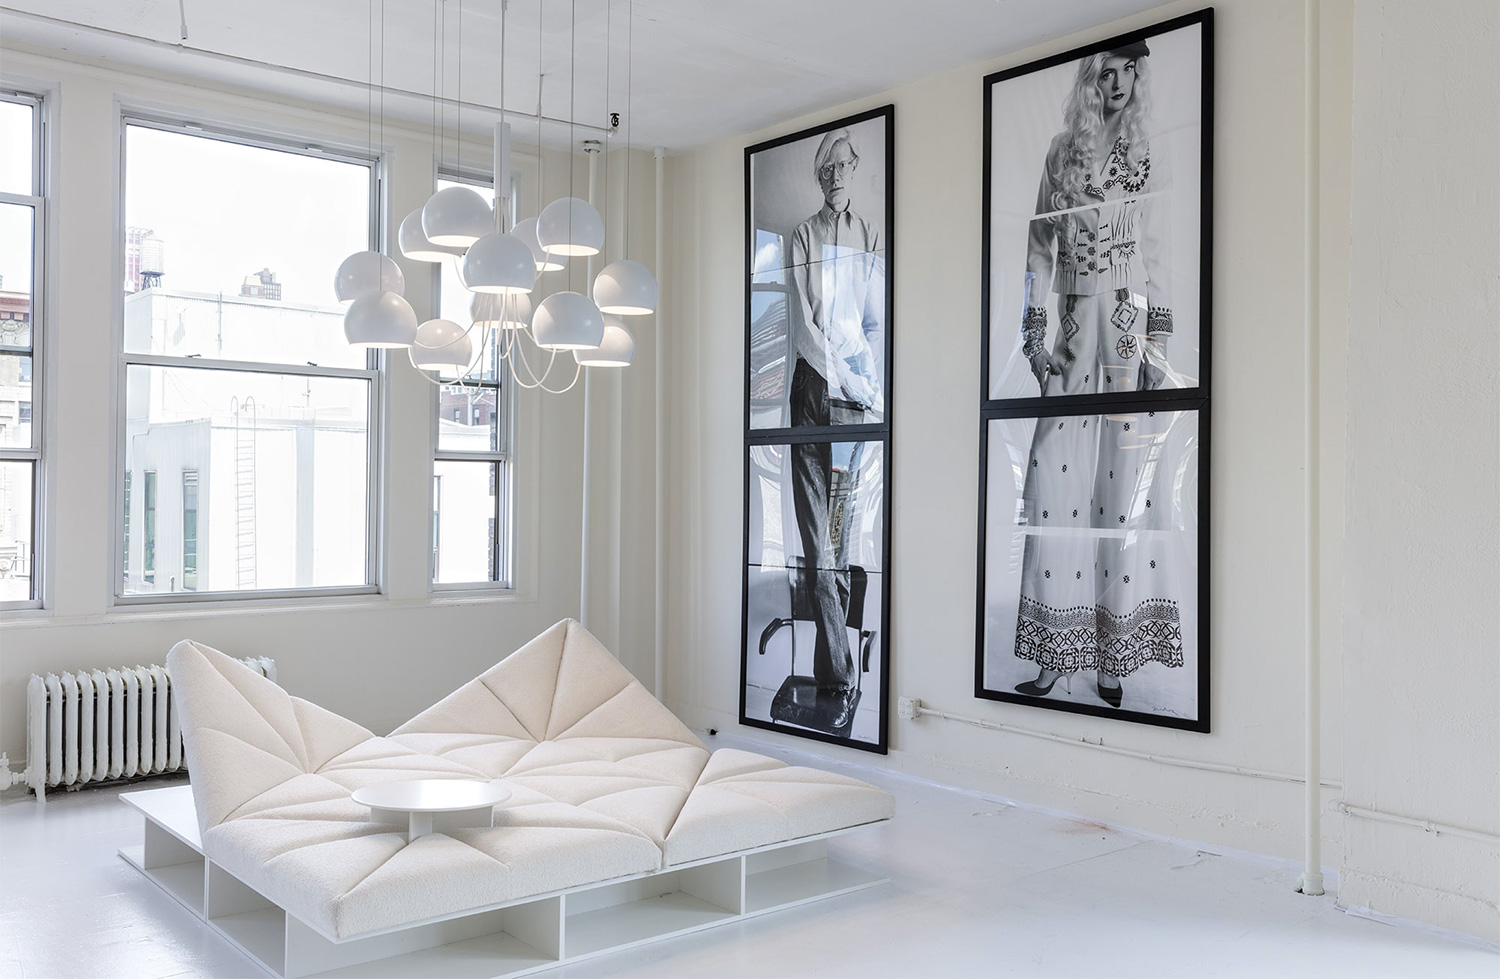 One of furniture designer Pierre Paulin's modern chairs sits in the middle of a white living area.